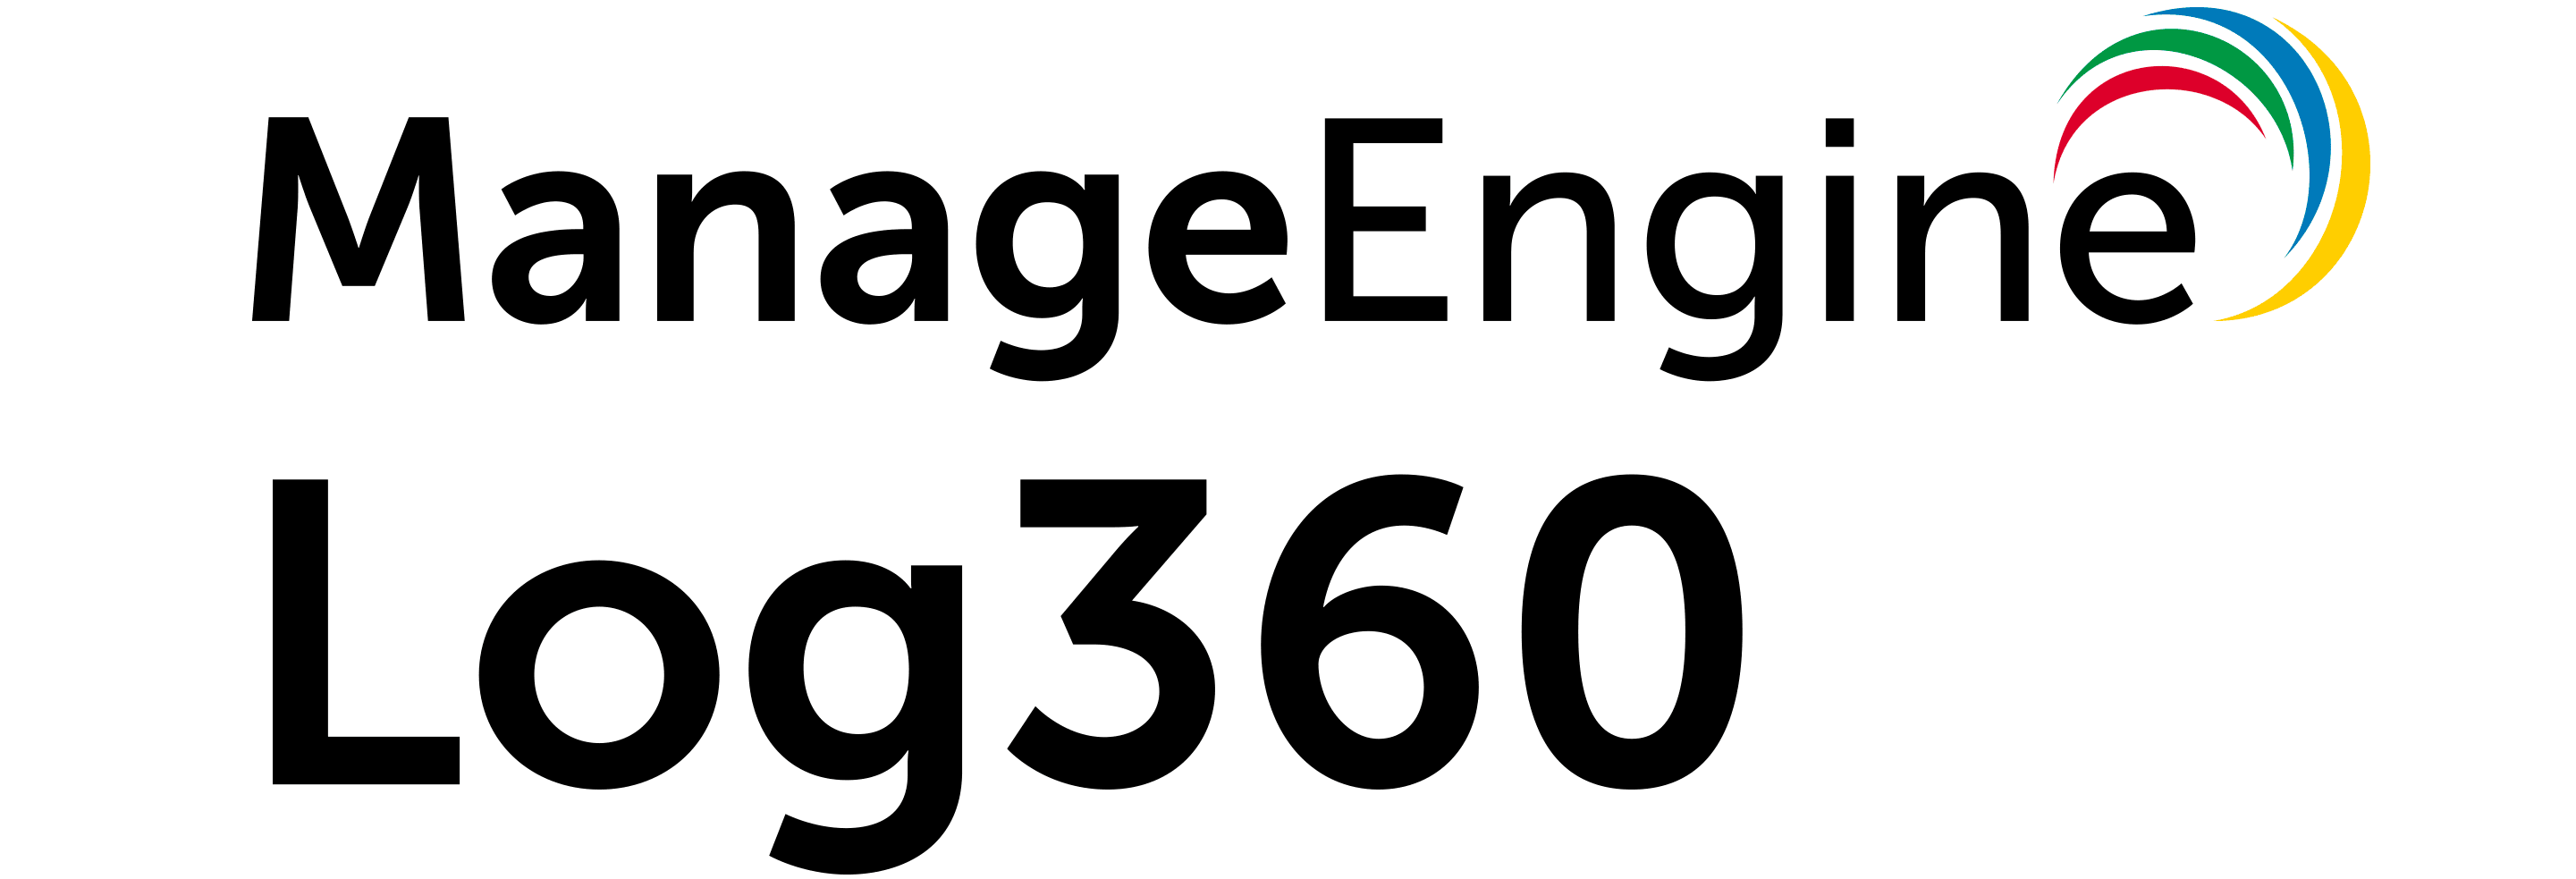 Learn about our sponsor ManageEngine